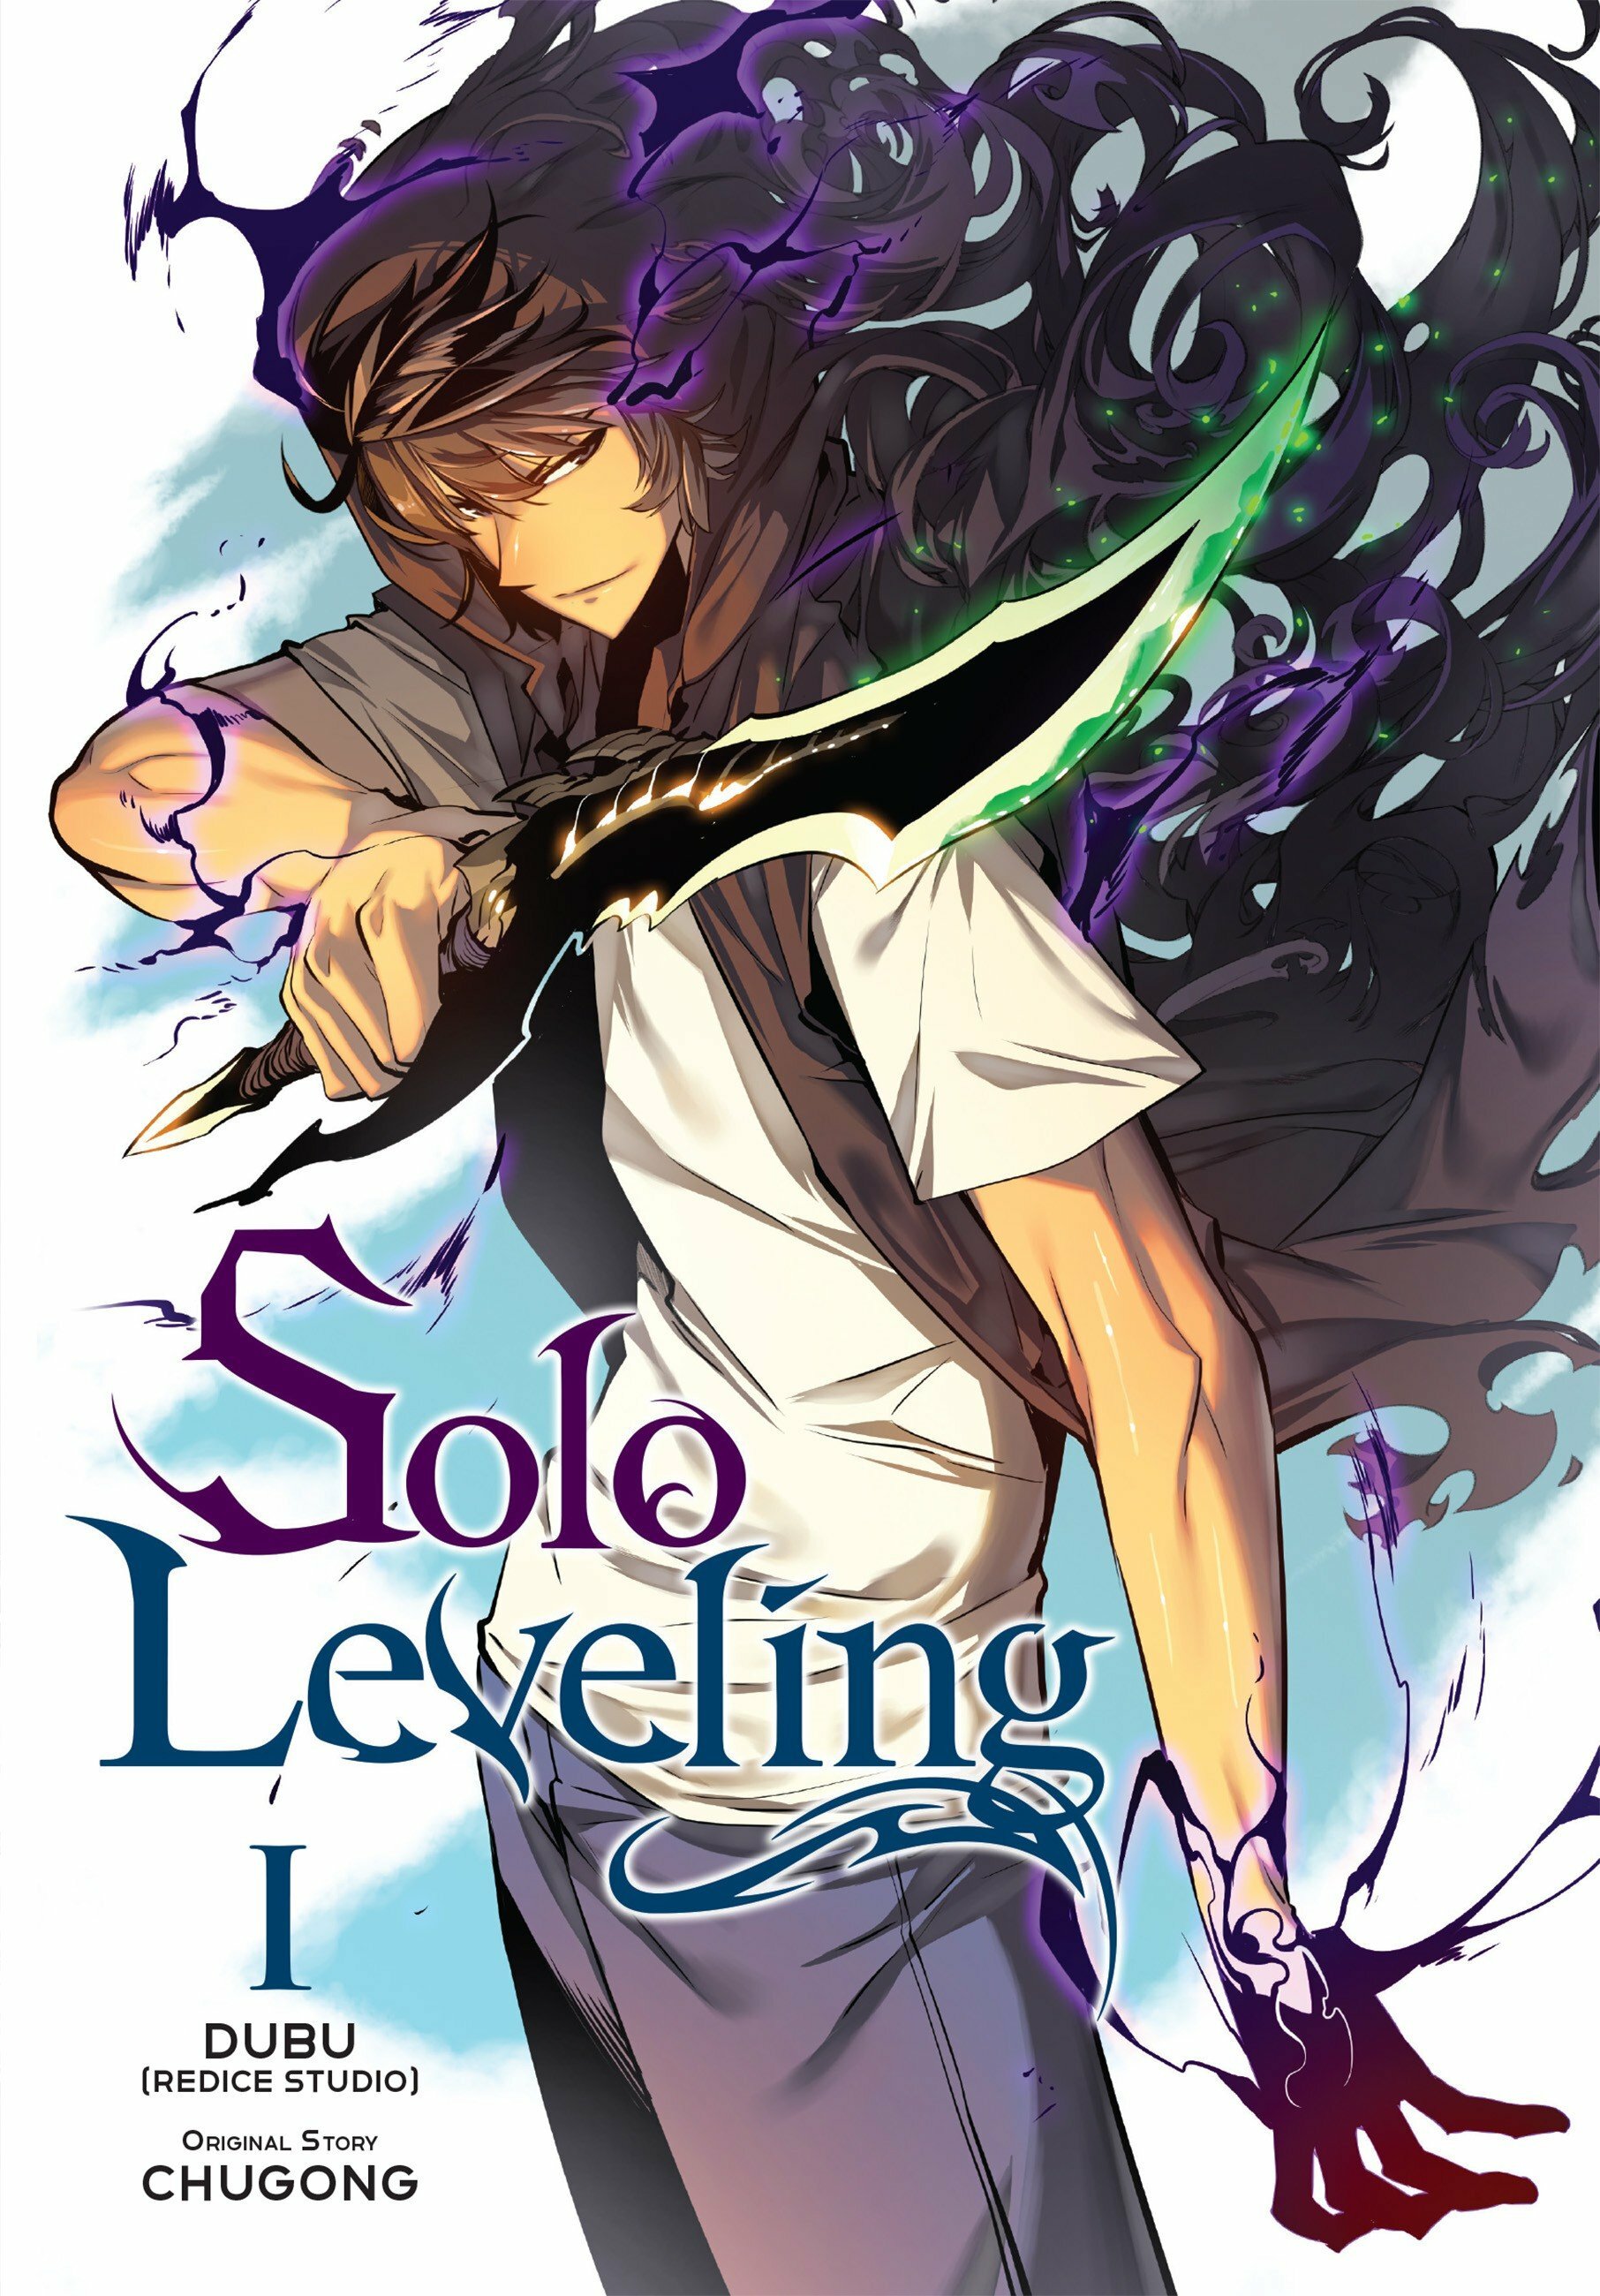 Solo Leveling #1